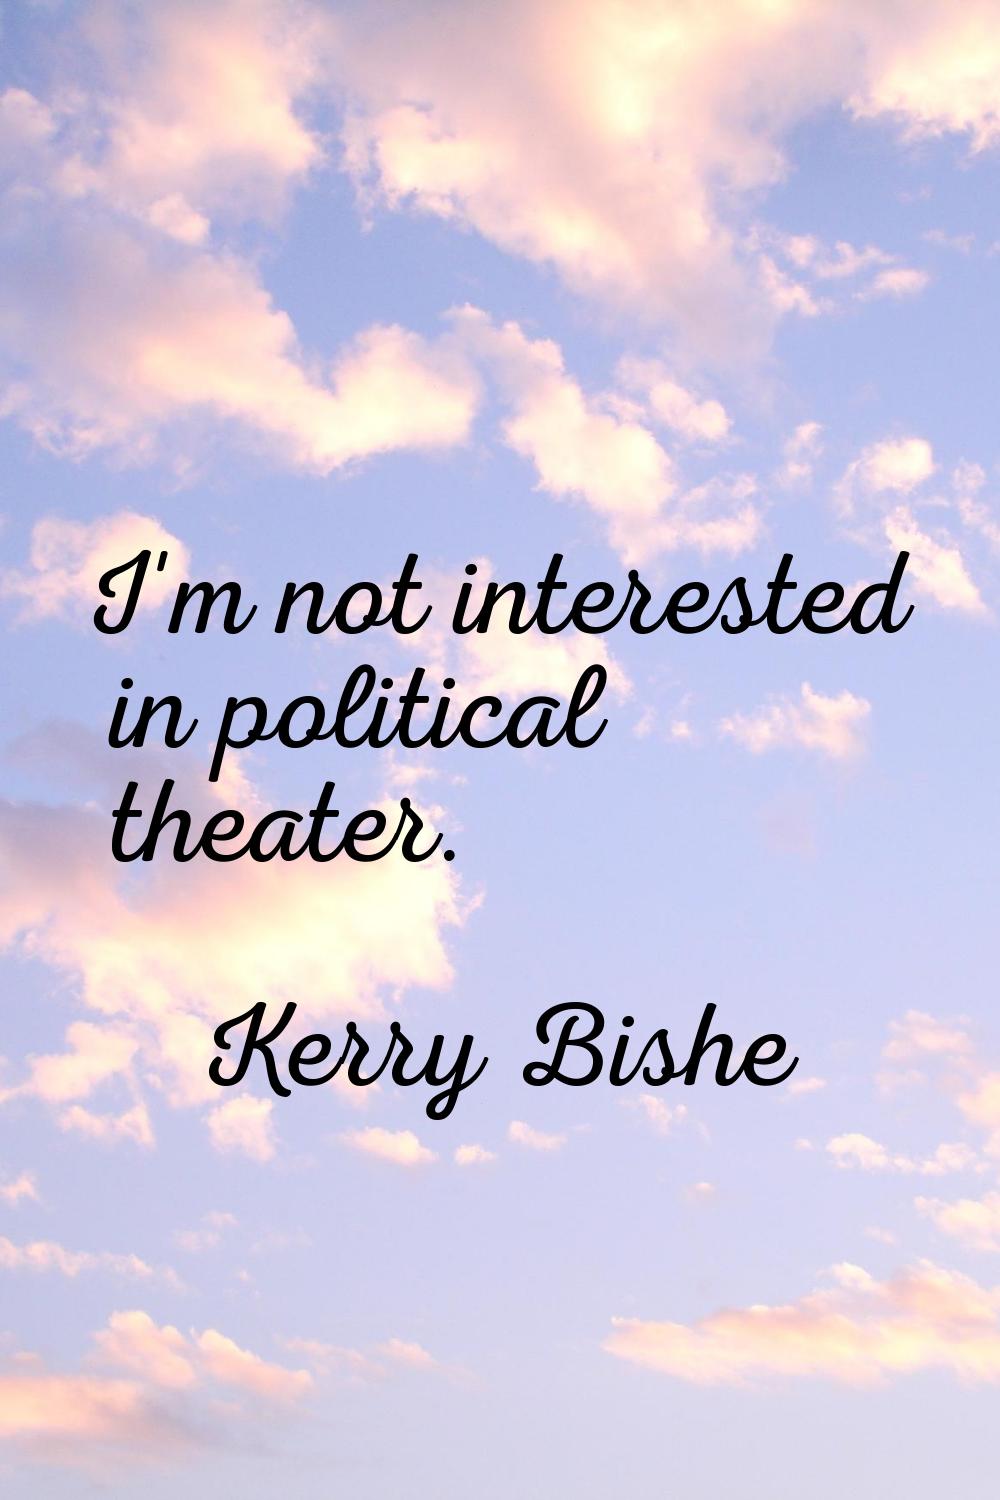 I'm not interested in political theater.